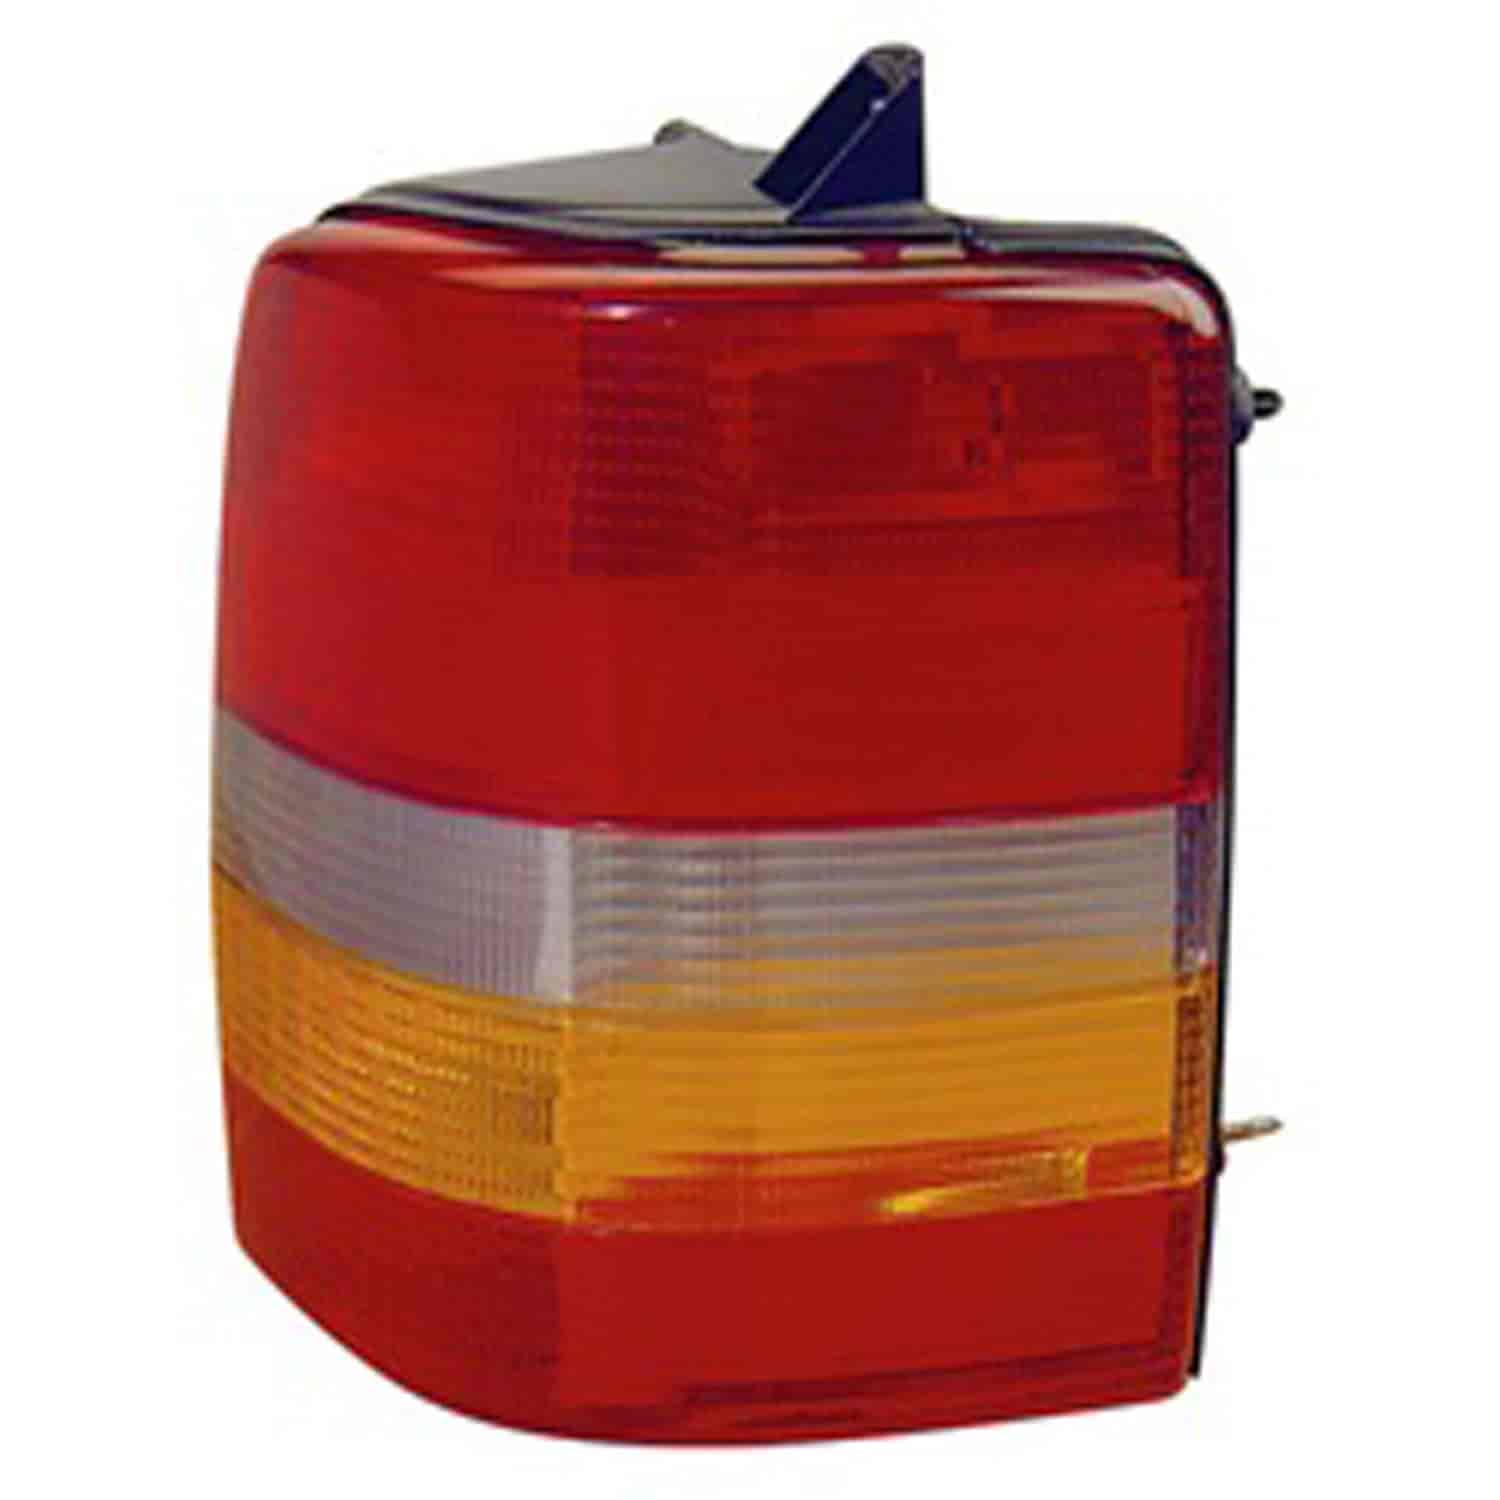 Replacement tail light assembly from Omix-ADA, Fits right side of 93-98 Jeep Grand Cherokee ZJ